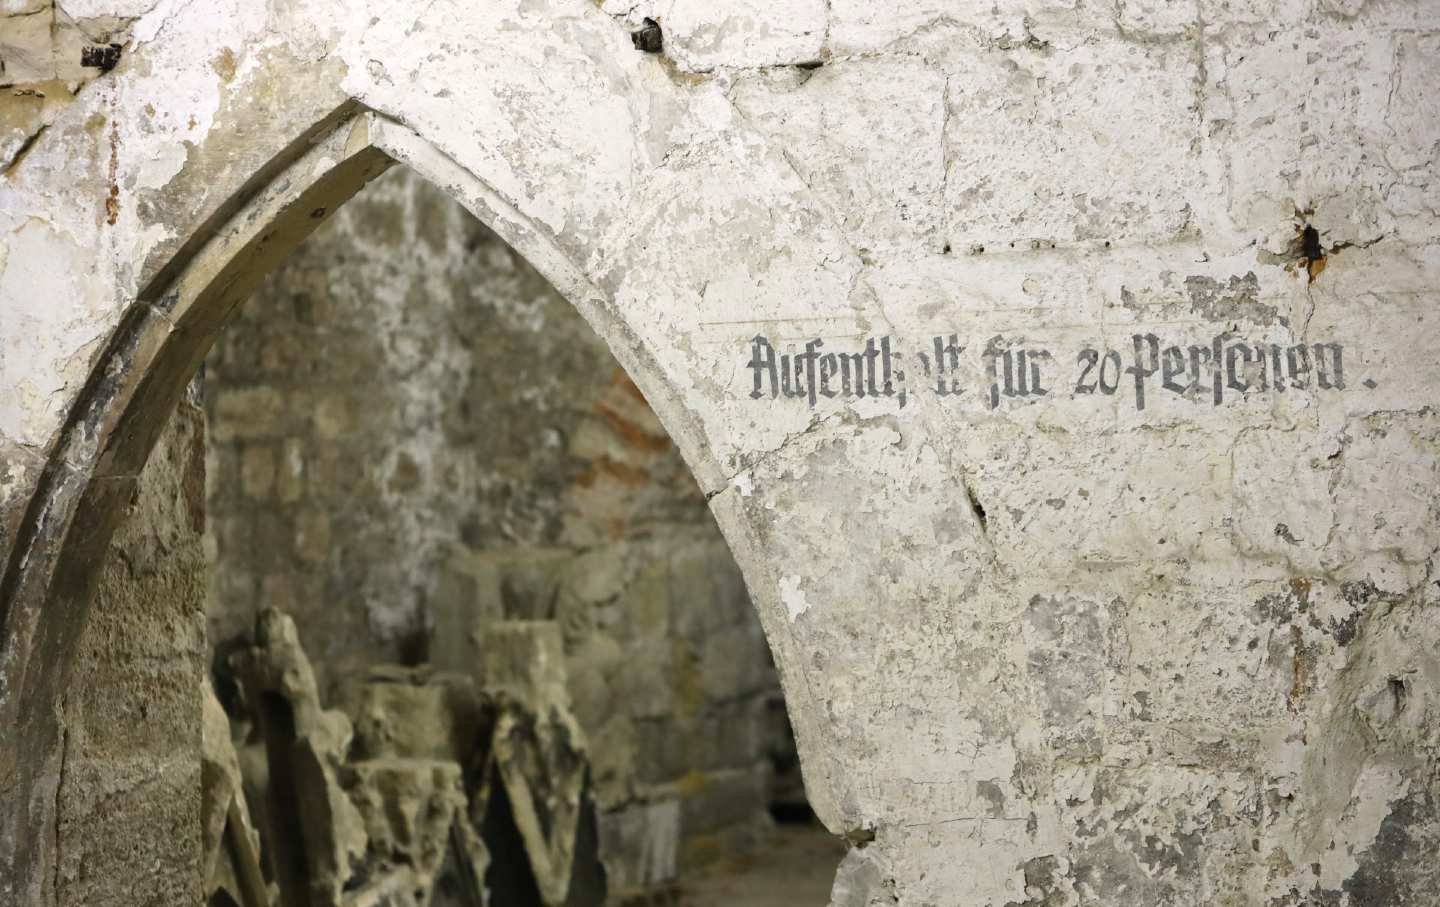 Photo of a historical inscription in the Remterkeller of Halberstadt Cathedral.